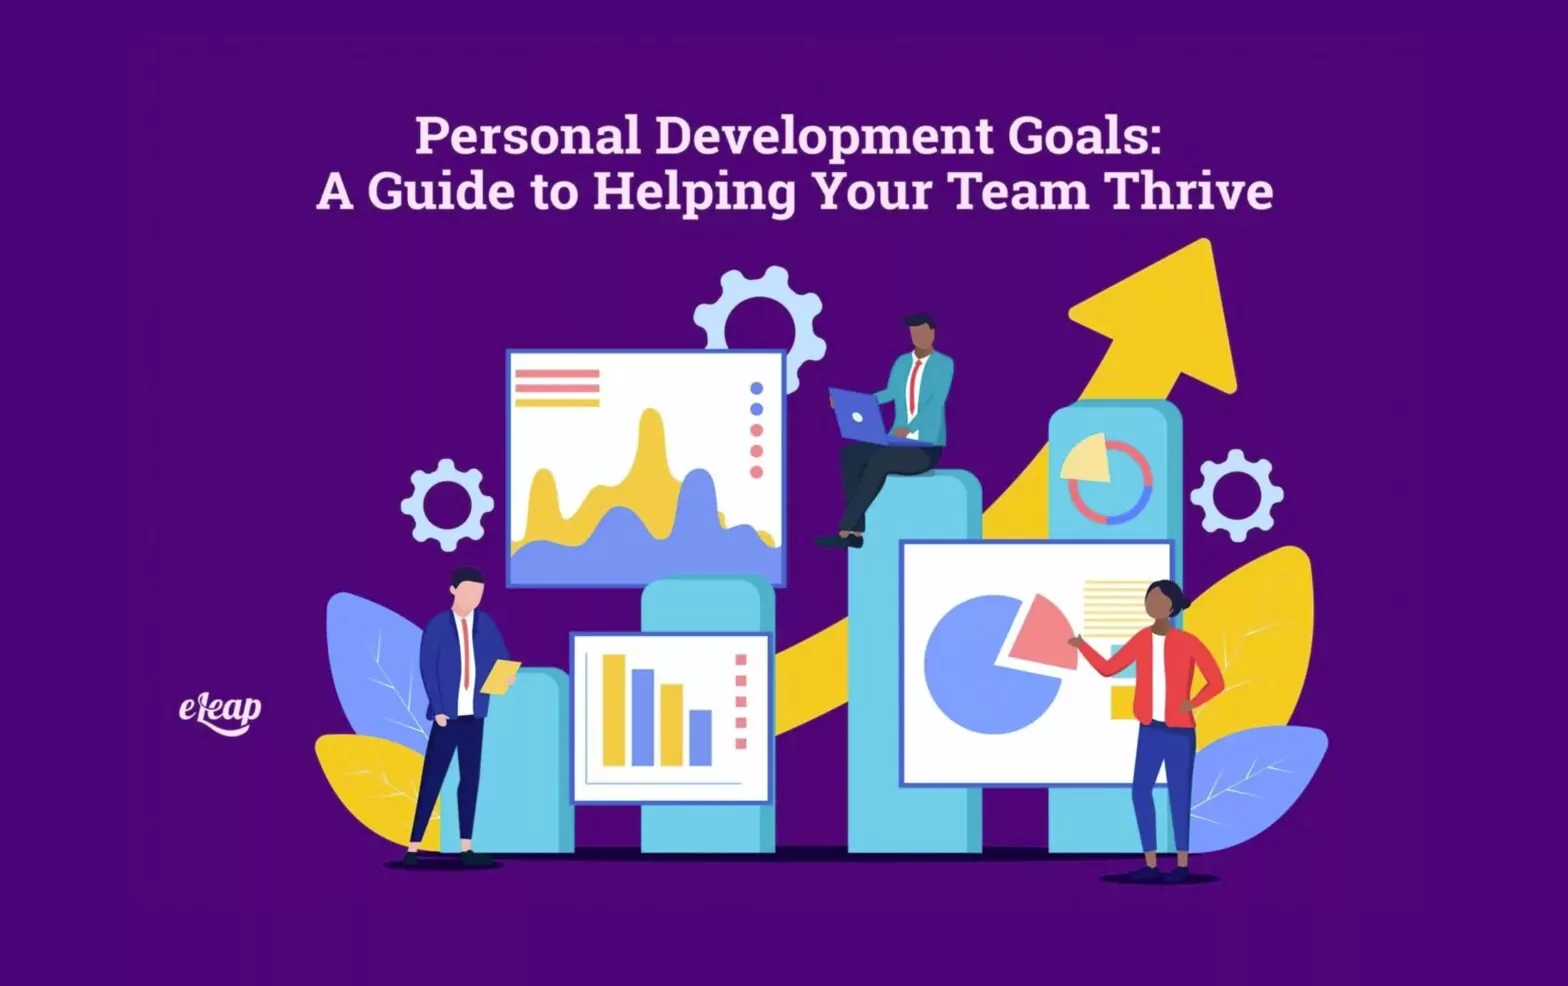 Personal Development Goals: A Guide to Helping Your Team Thrive